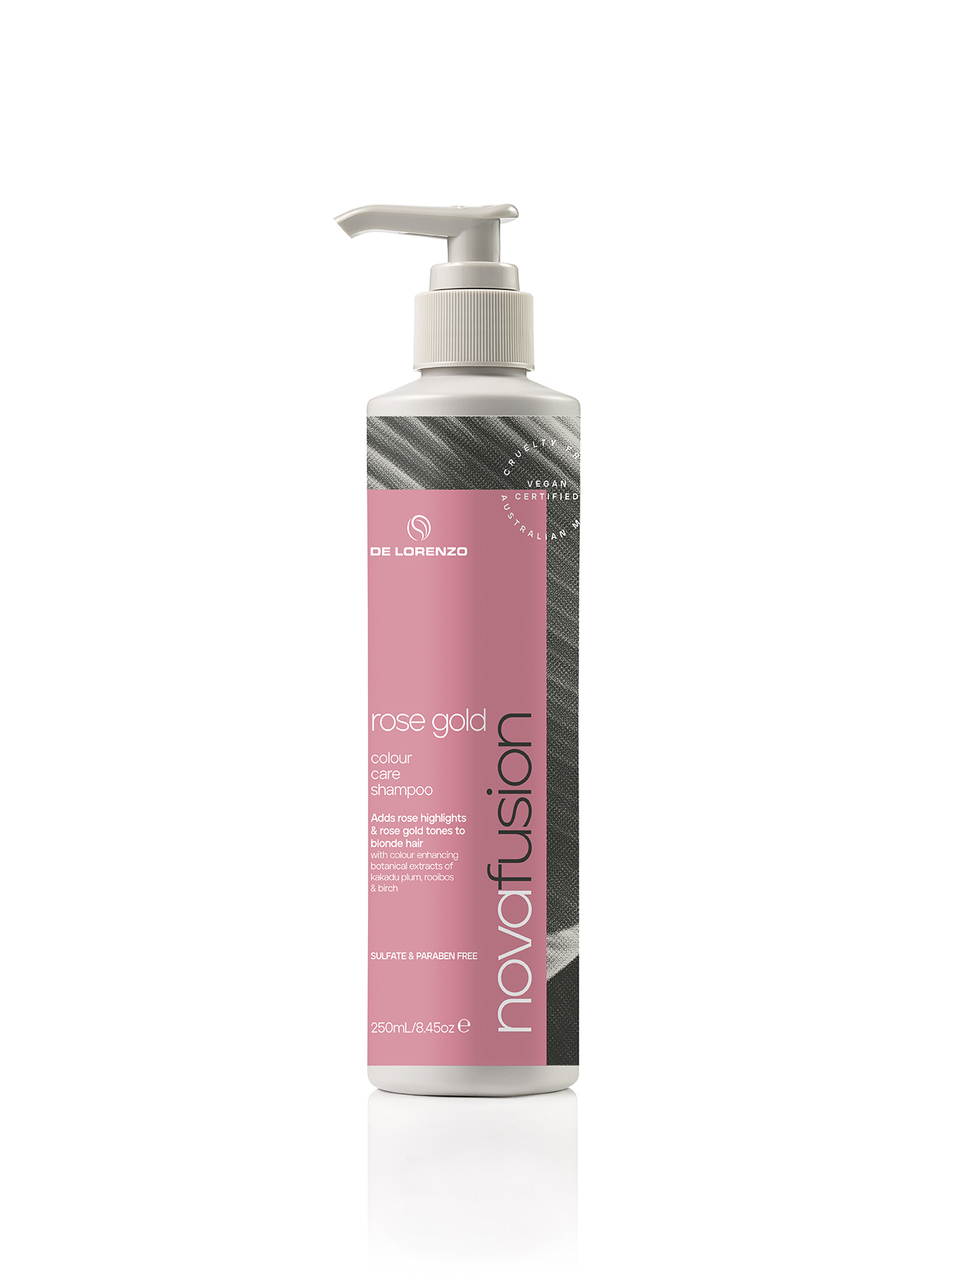 De Lorenzo Nova Fusion Rose Gold Shampoo 250ml - Hair products New Zealand  | Nation wide hairdressing & hair care group